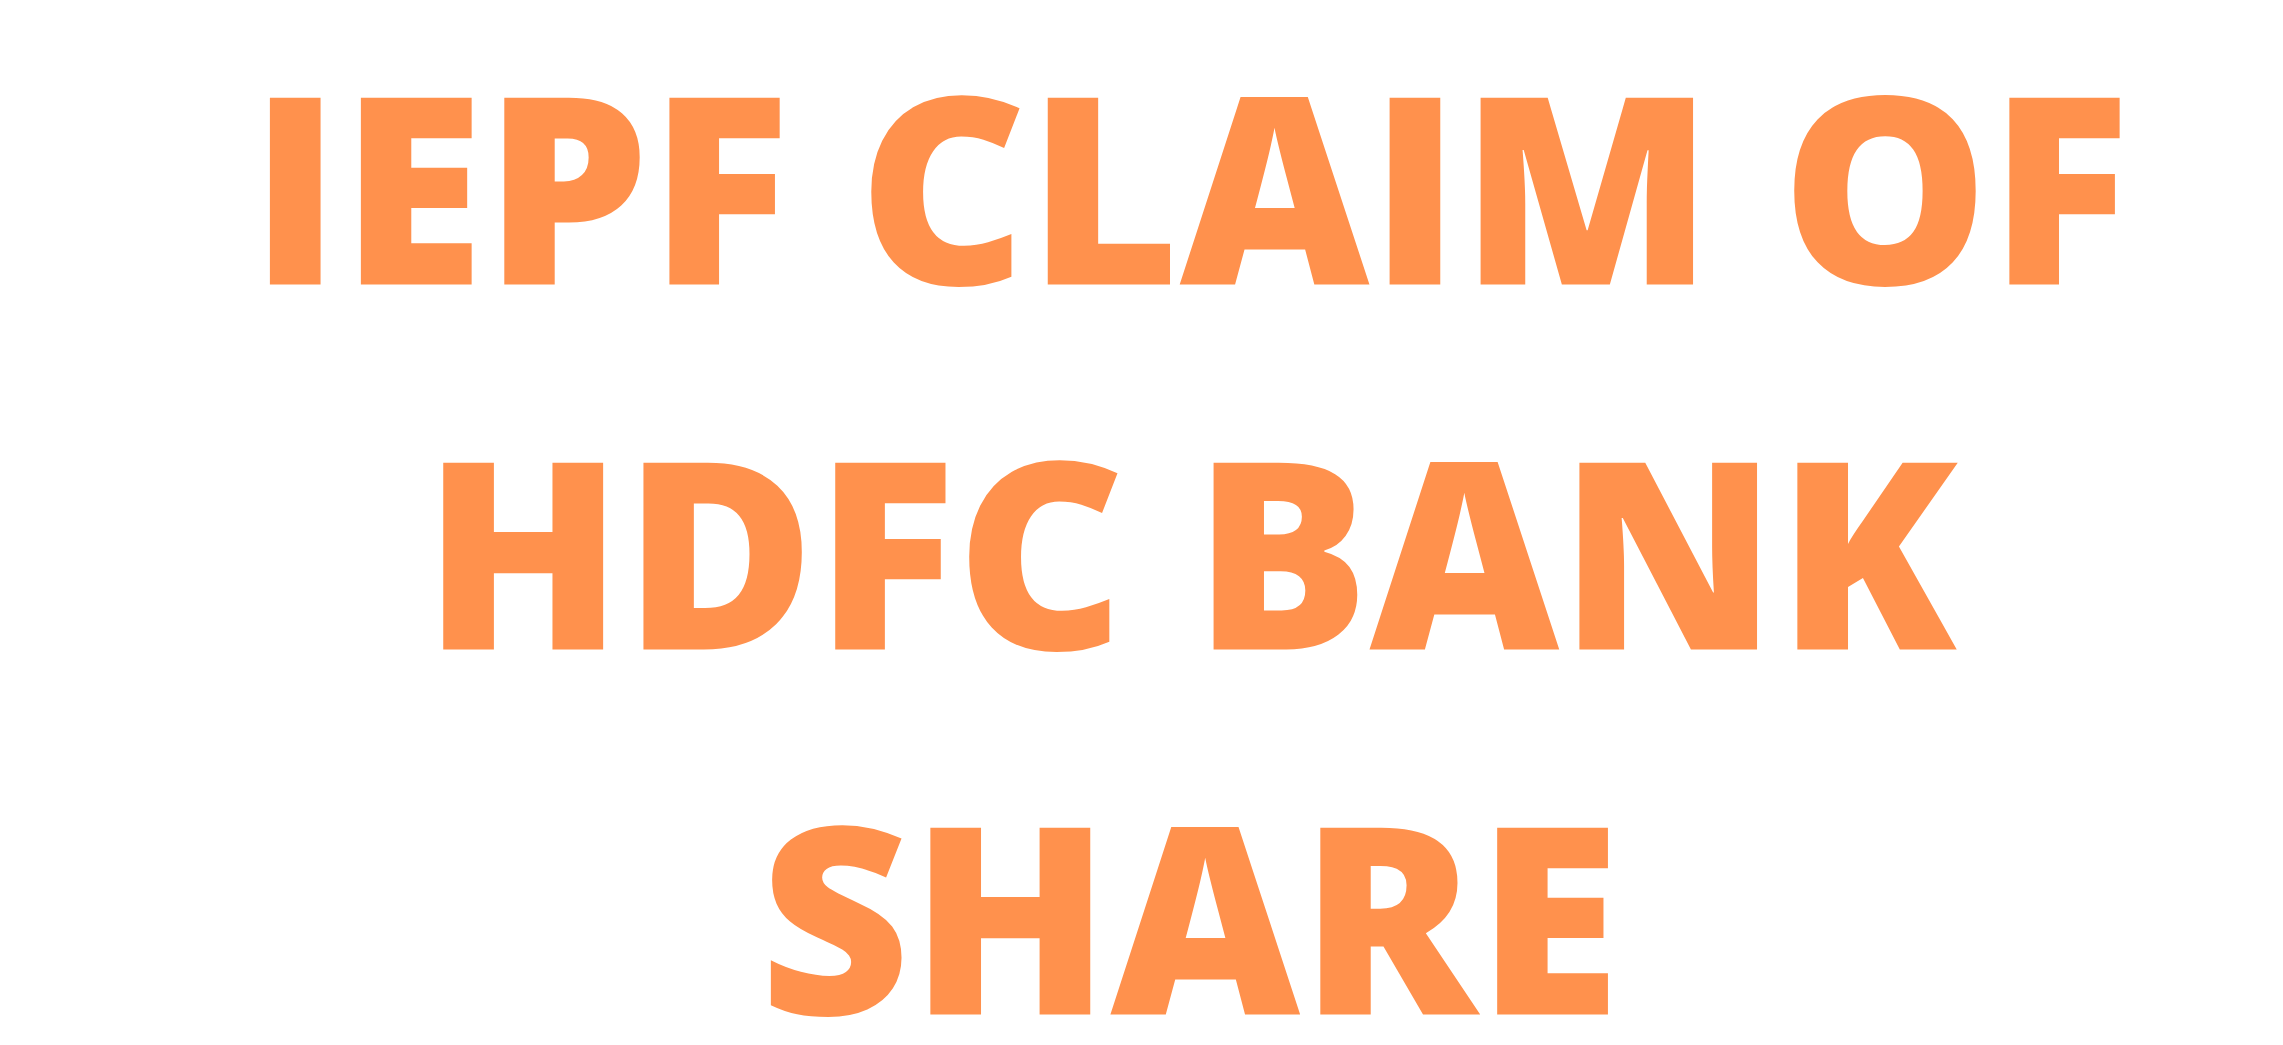 All about IEPF claim of HDFC BANK shares / unclaimed dividend of HDFC BANK shares